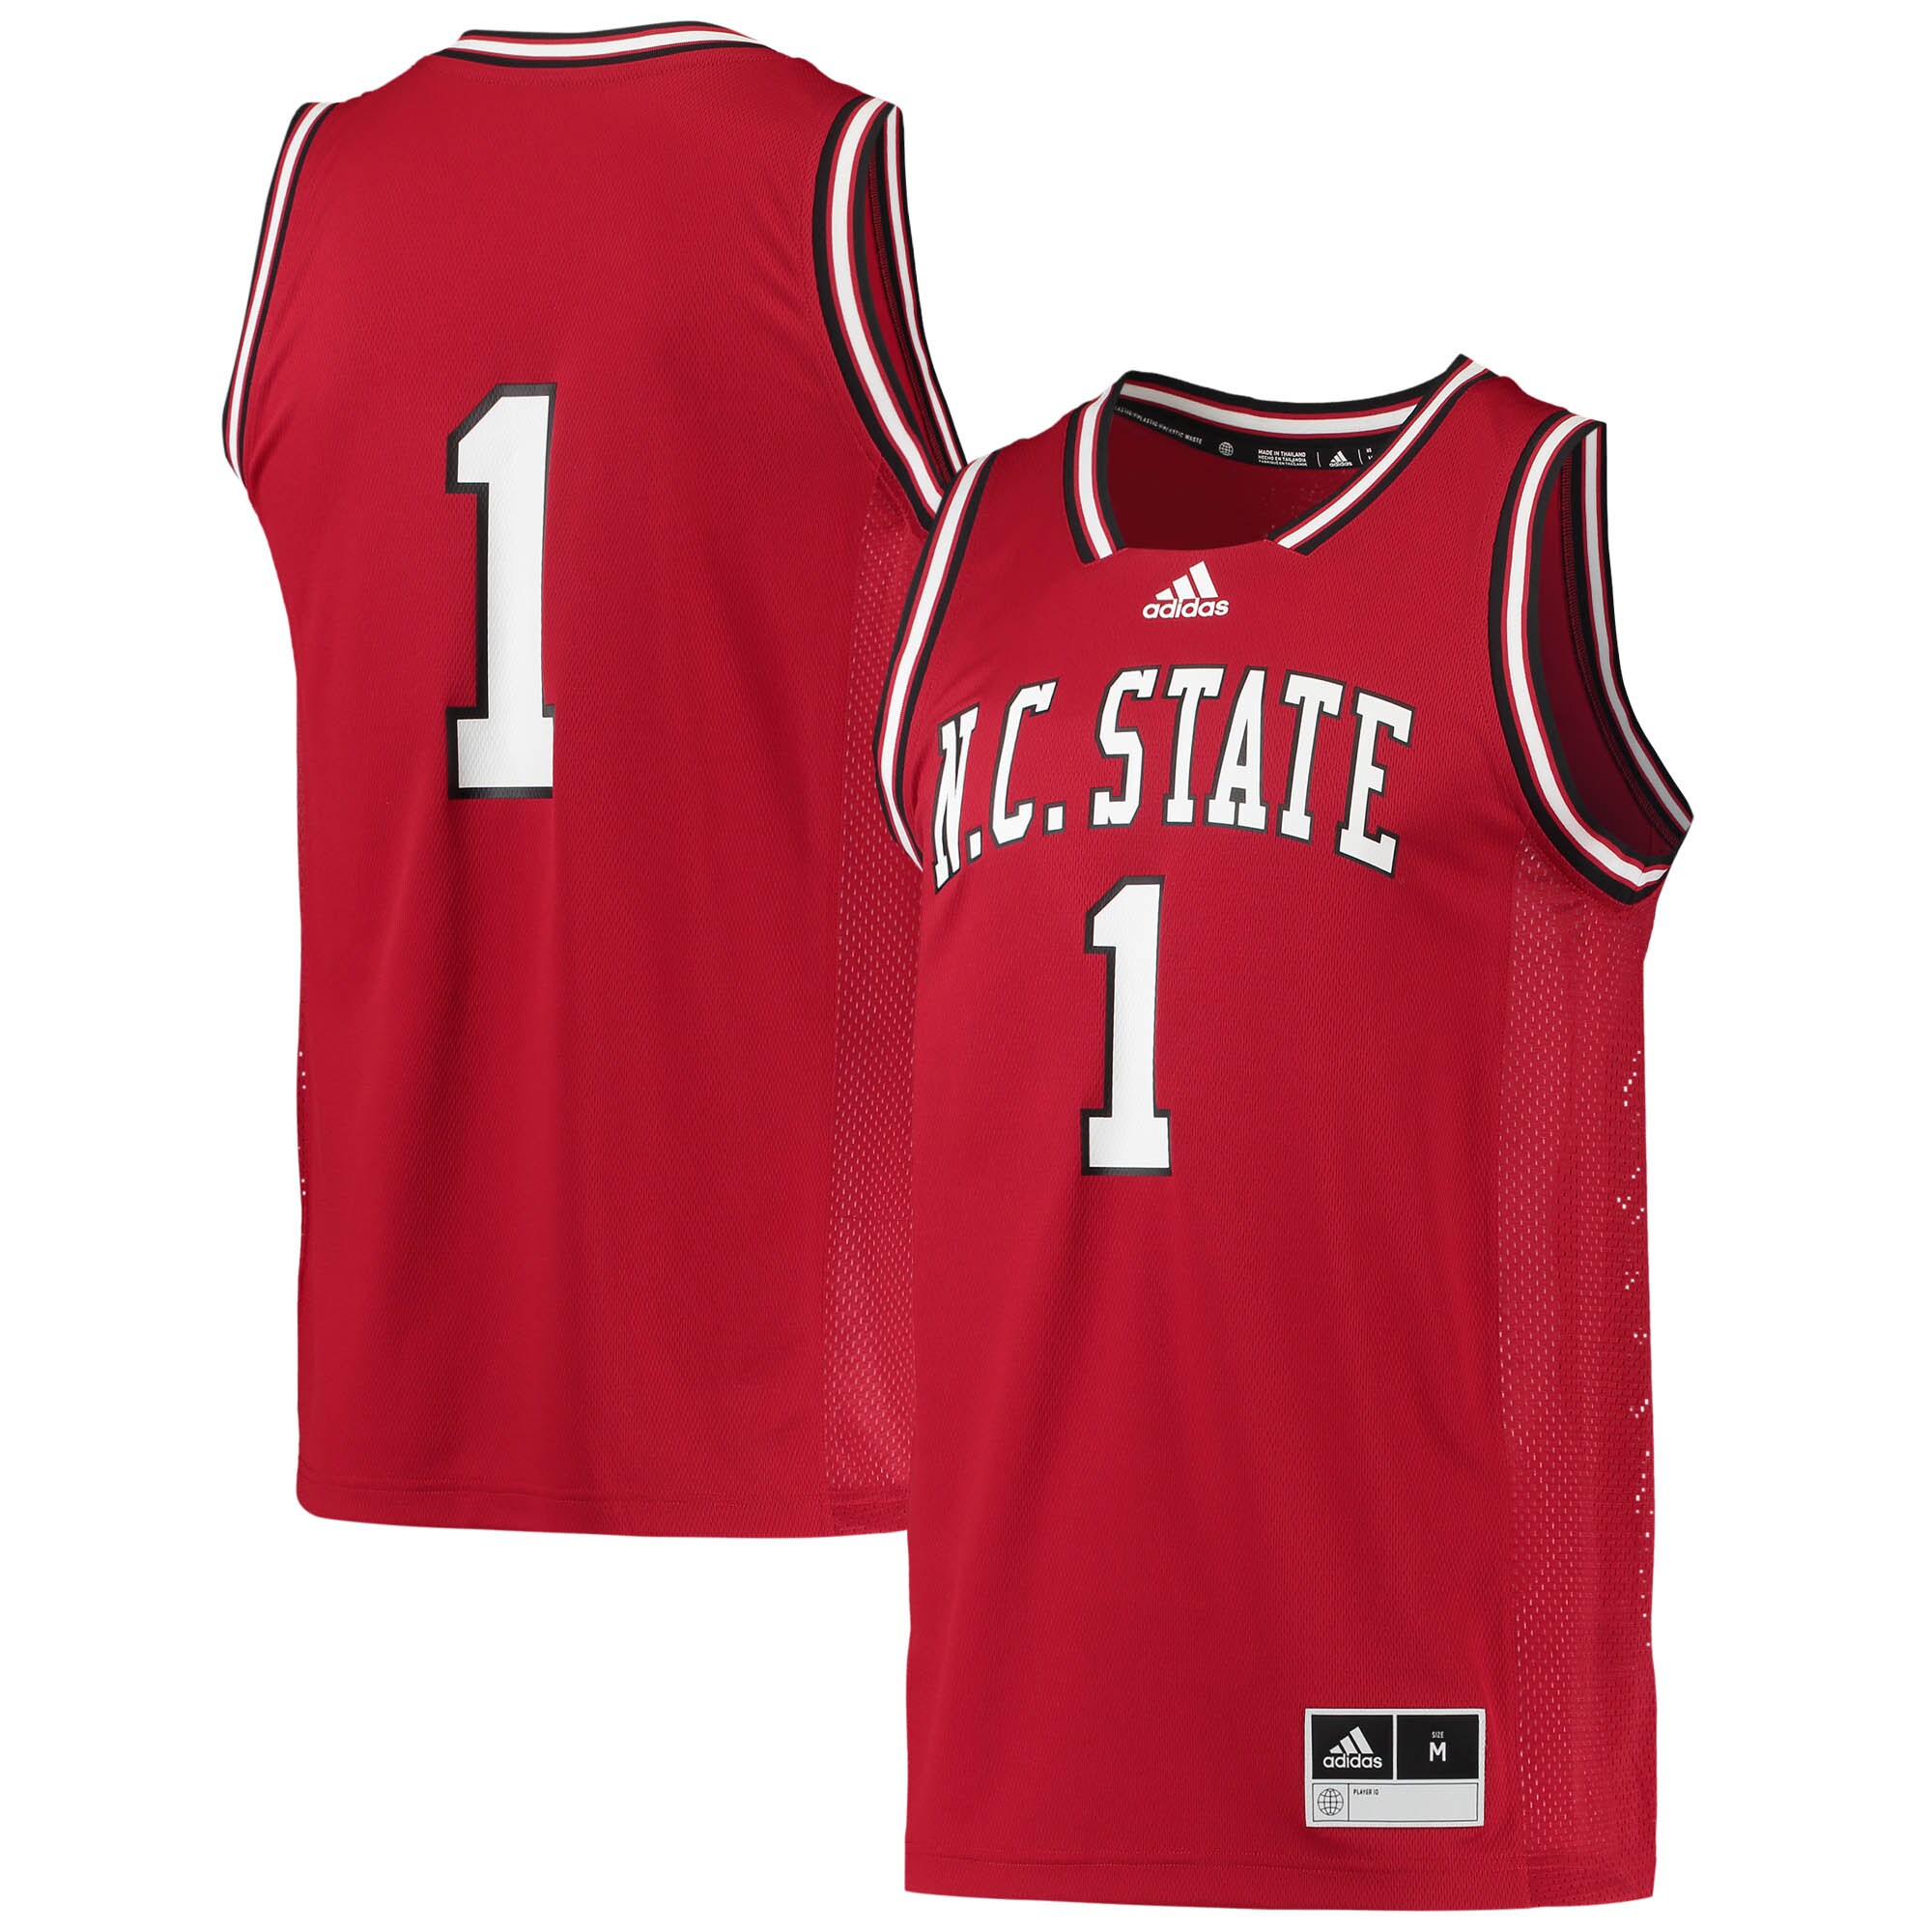 #1 Nc State Wolfpack   Reverse Retro Jersey - Red For Youth Women Men